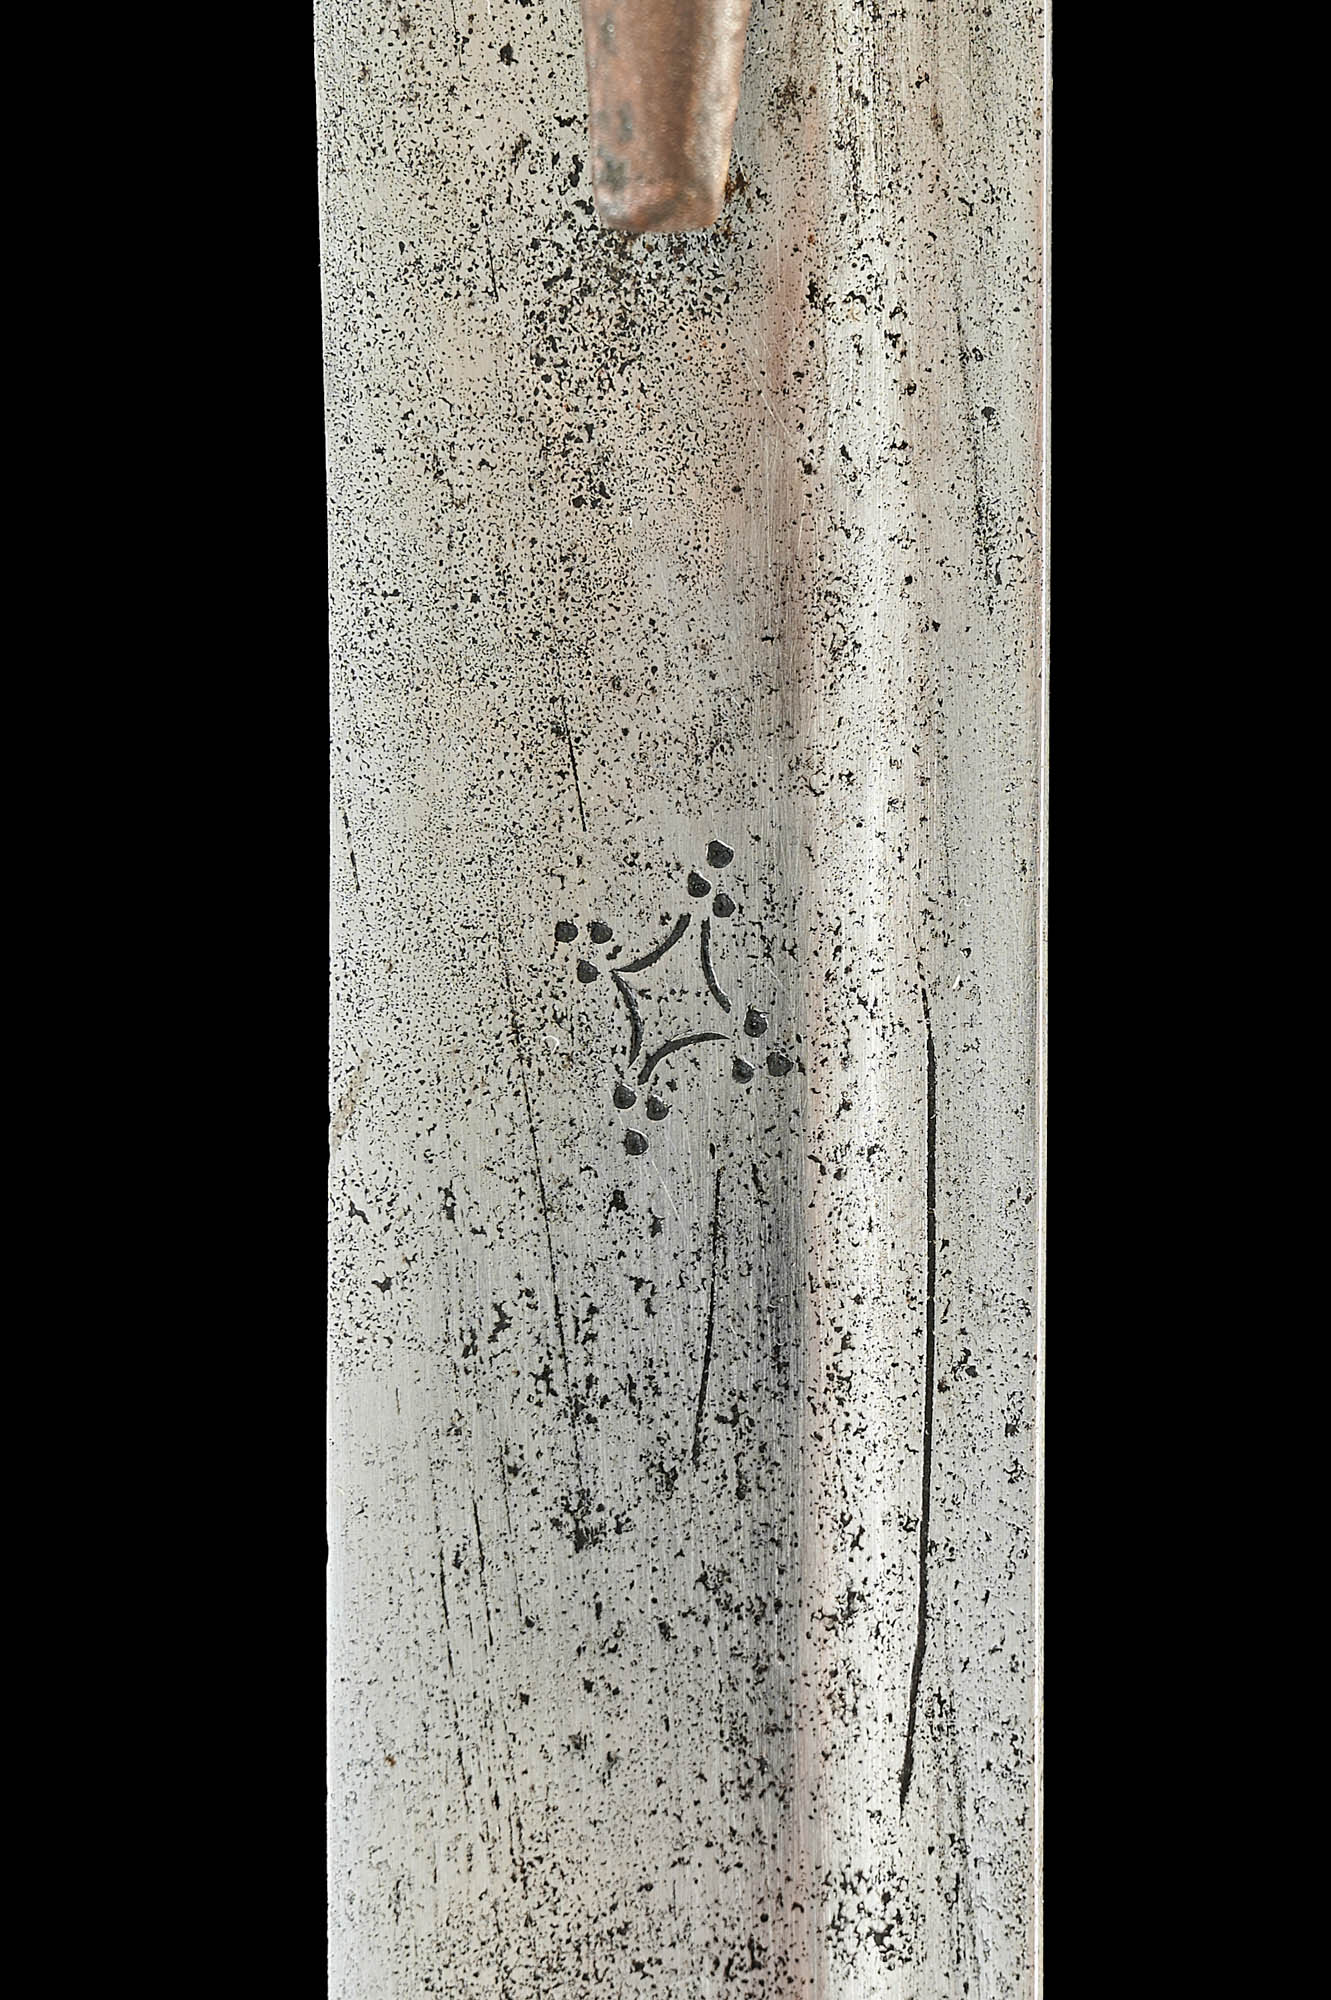 TATAR SABER SWORD DECORATED WITH RHOMBS - Image 7 of 21